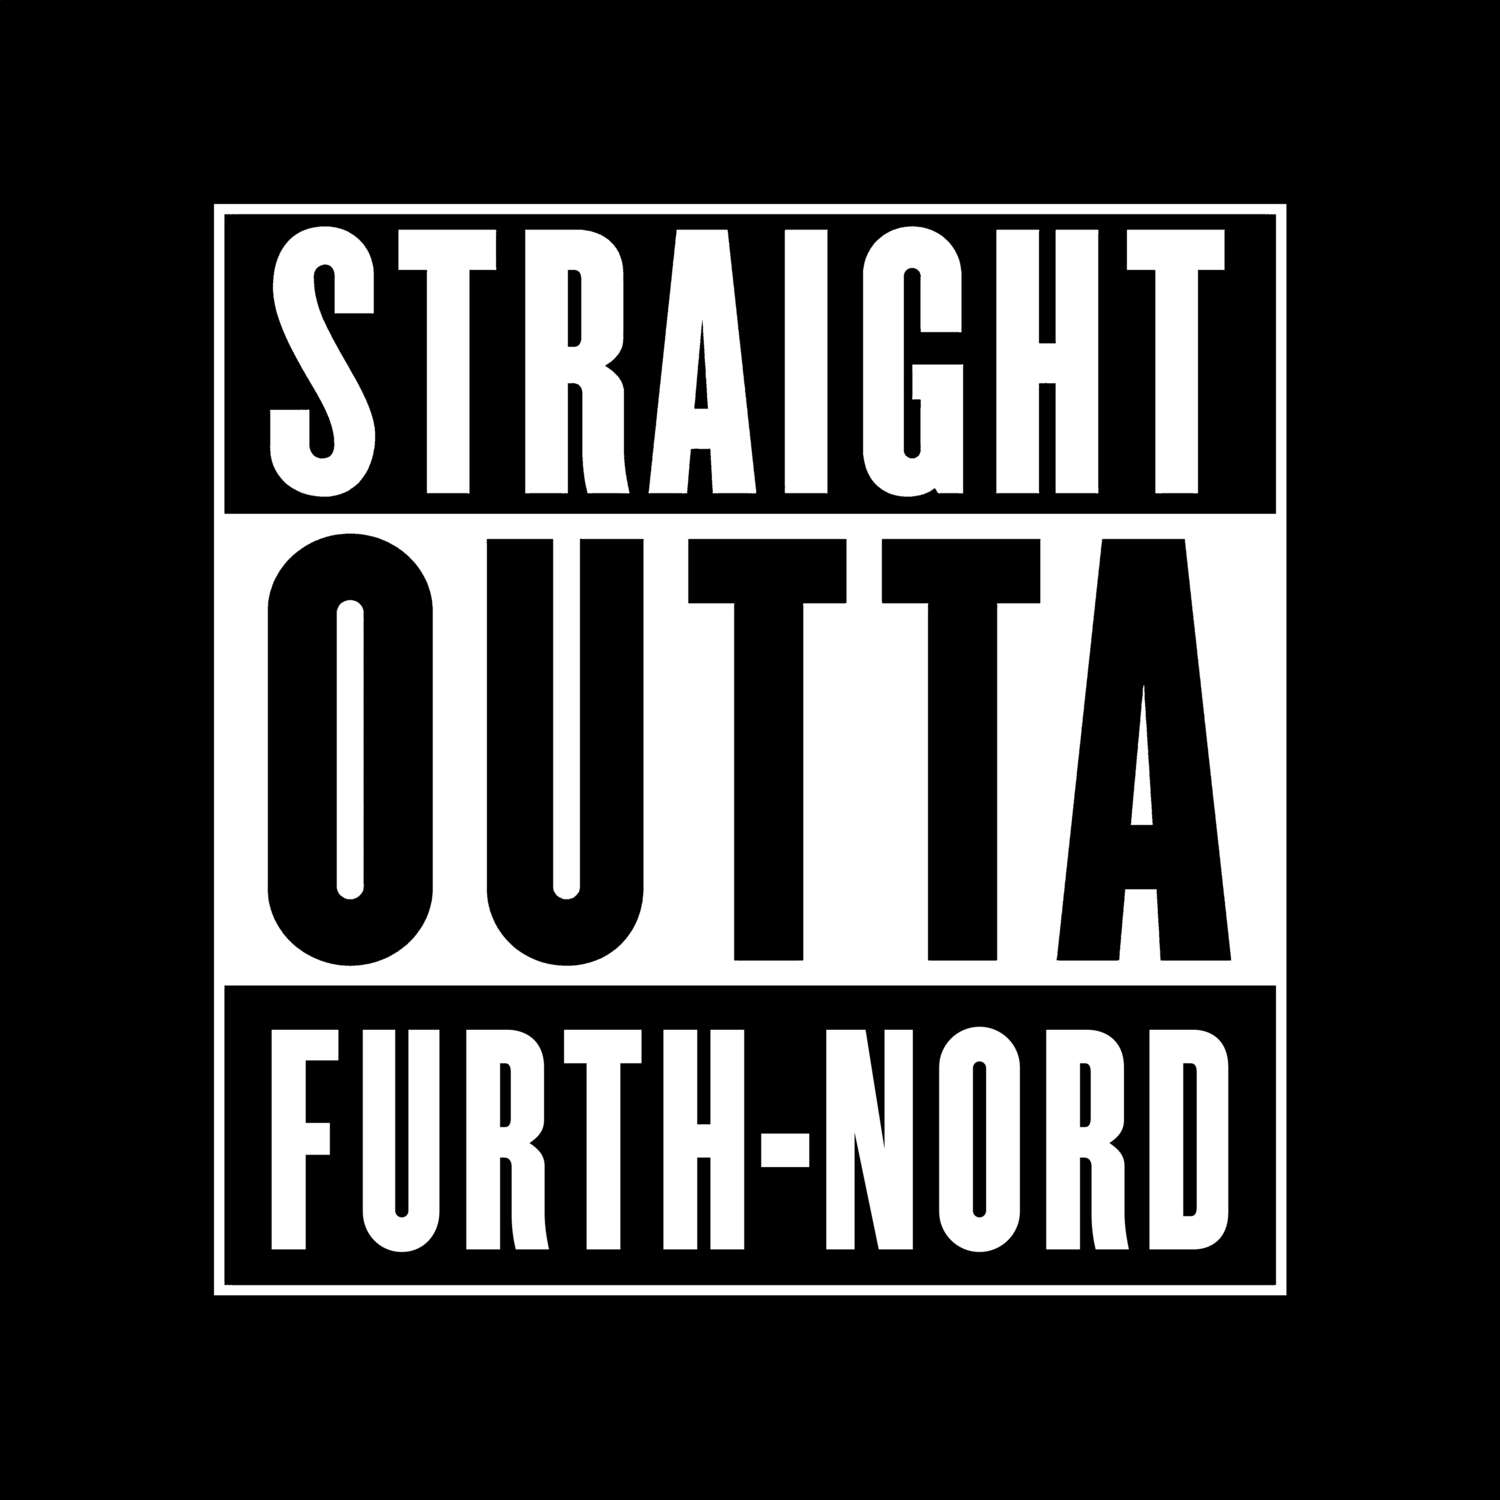 Furth-Nord T-Shirt »Straight Outta«